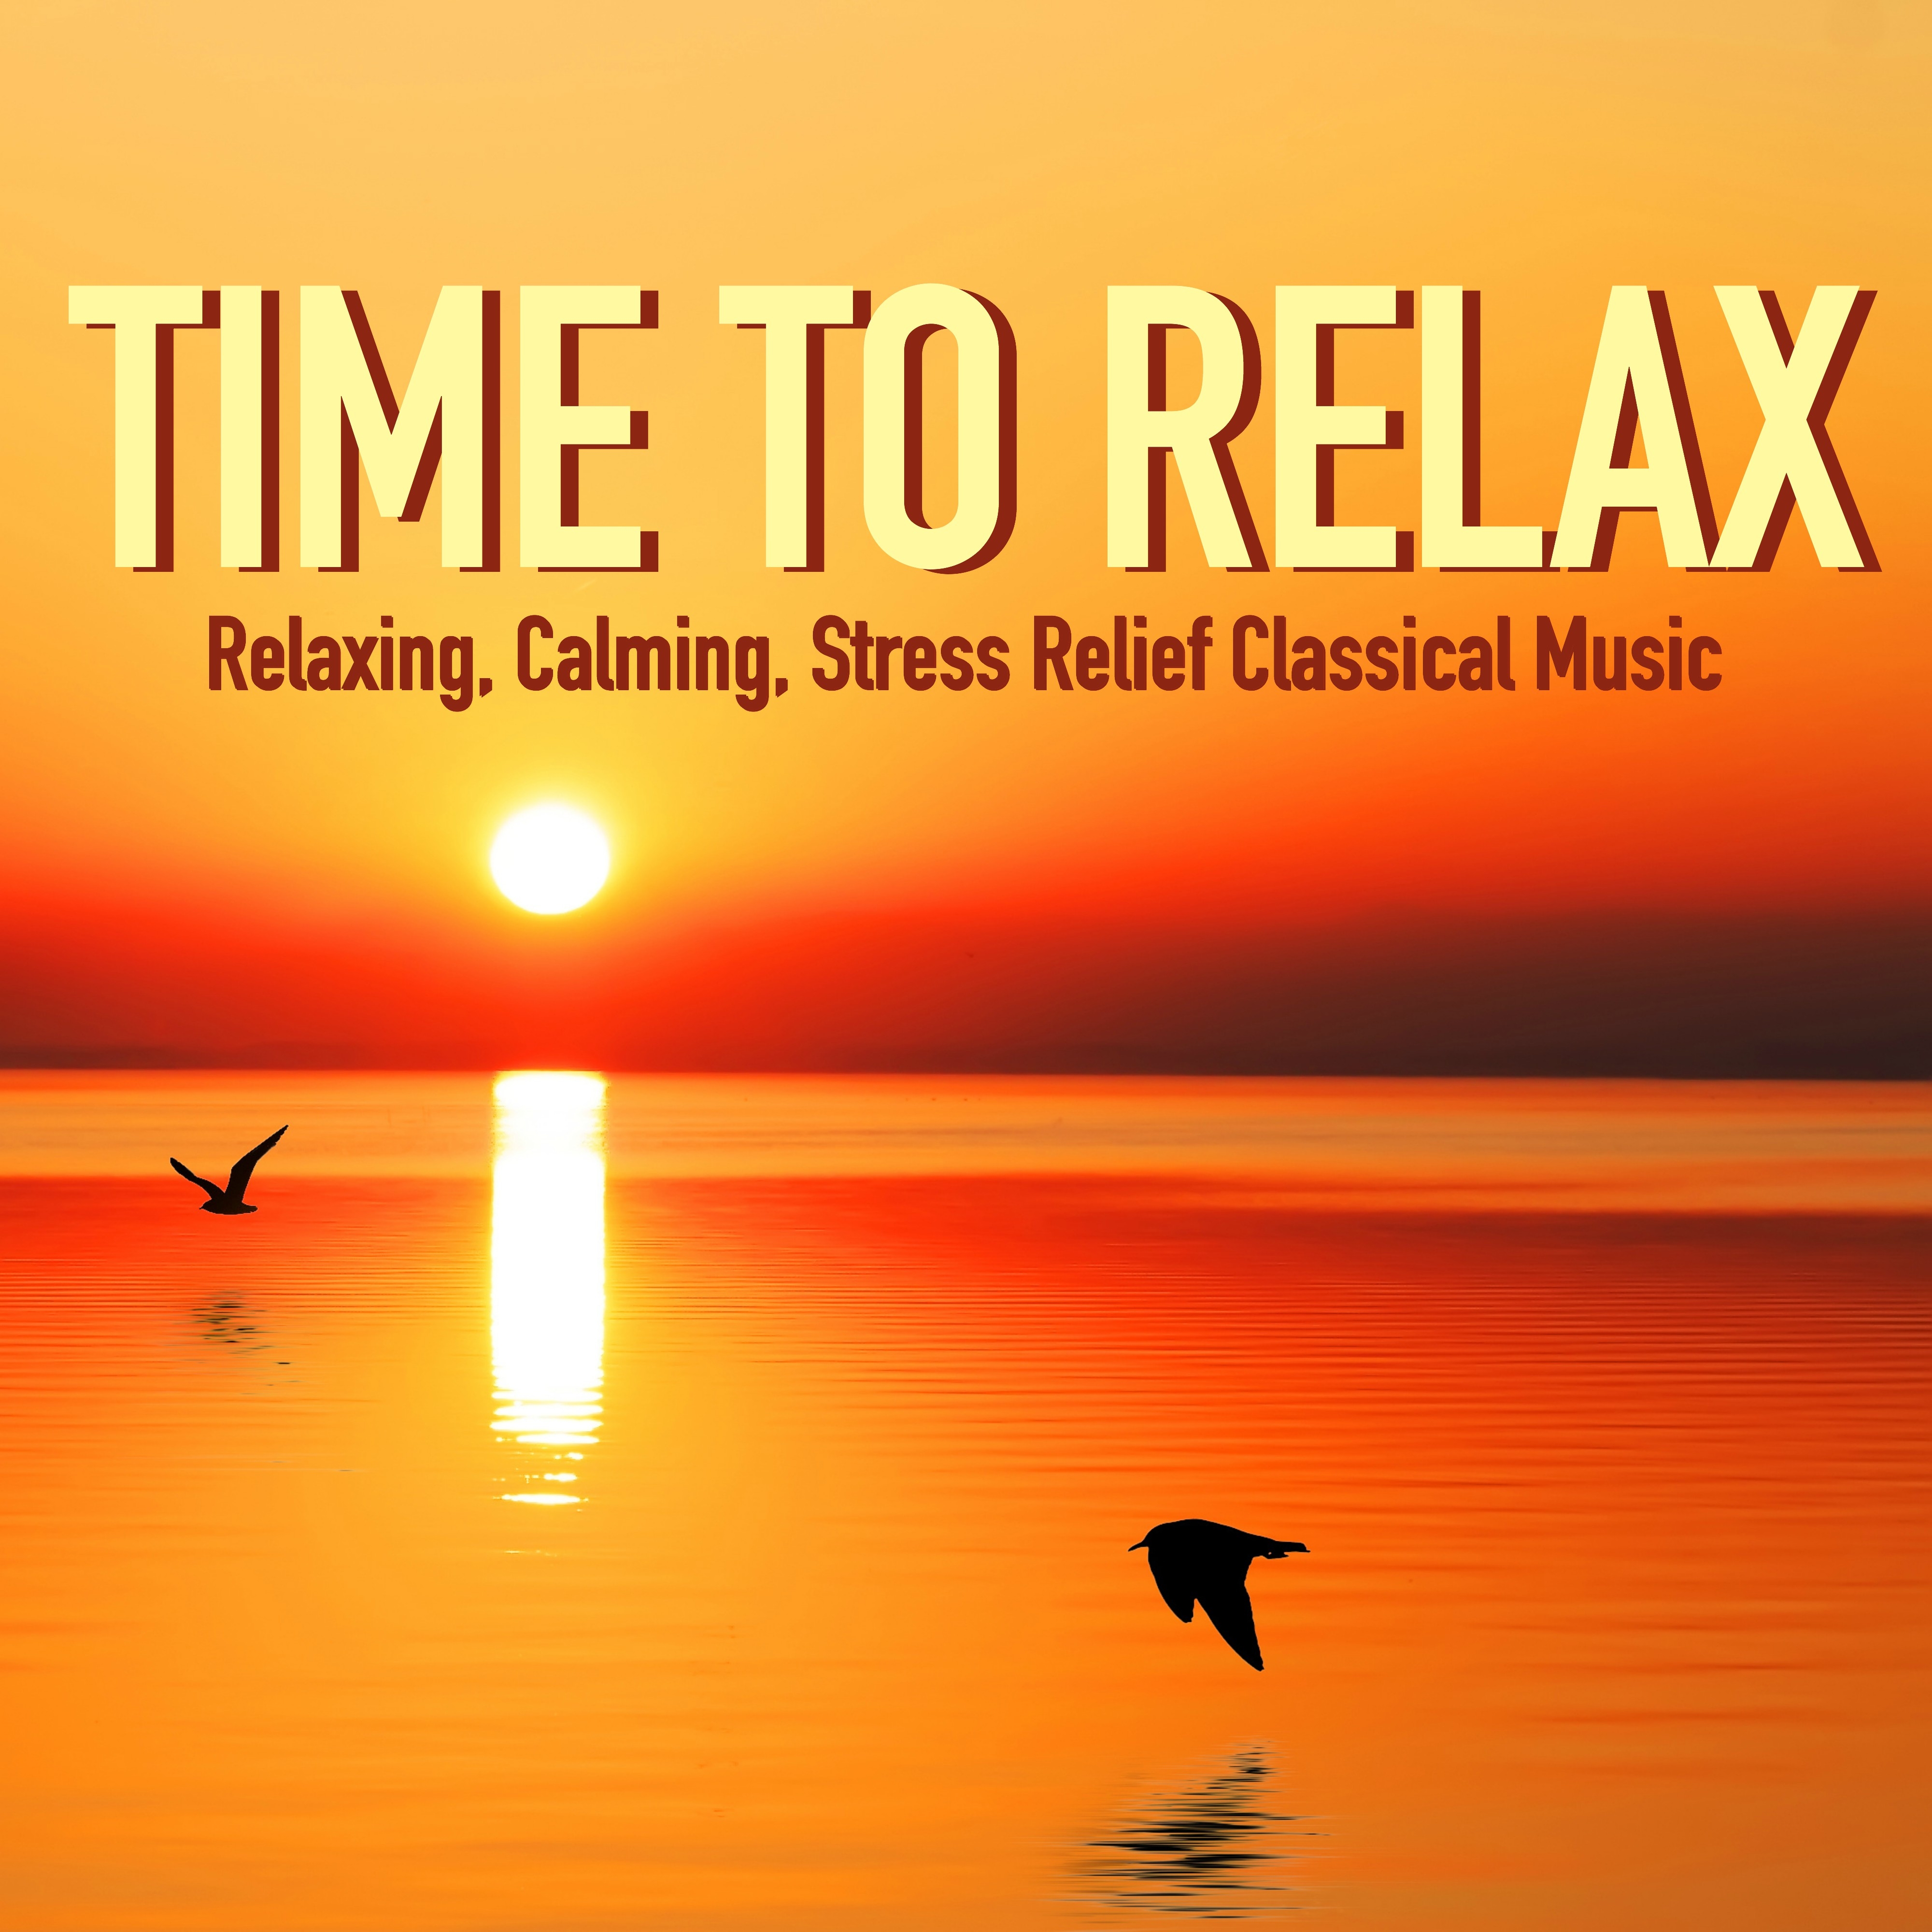 Time to Relax - Relaxing, Calming, Stress Relief Classical Music with Water Sounds & Nature for Healing Meditation, Massage & Yoga Rest